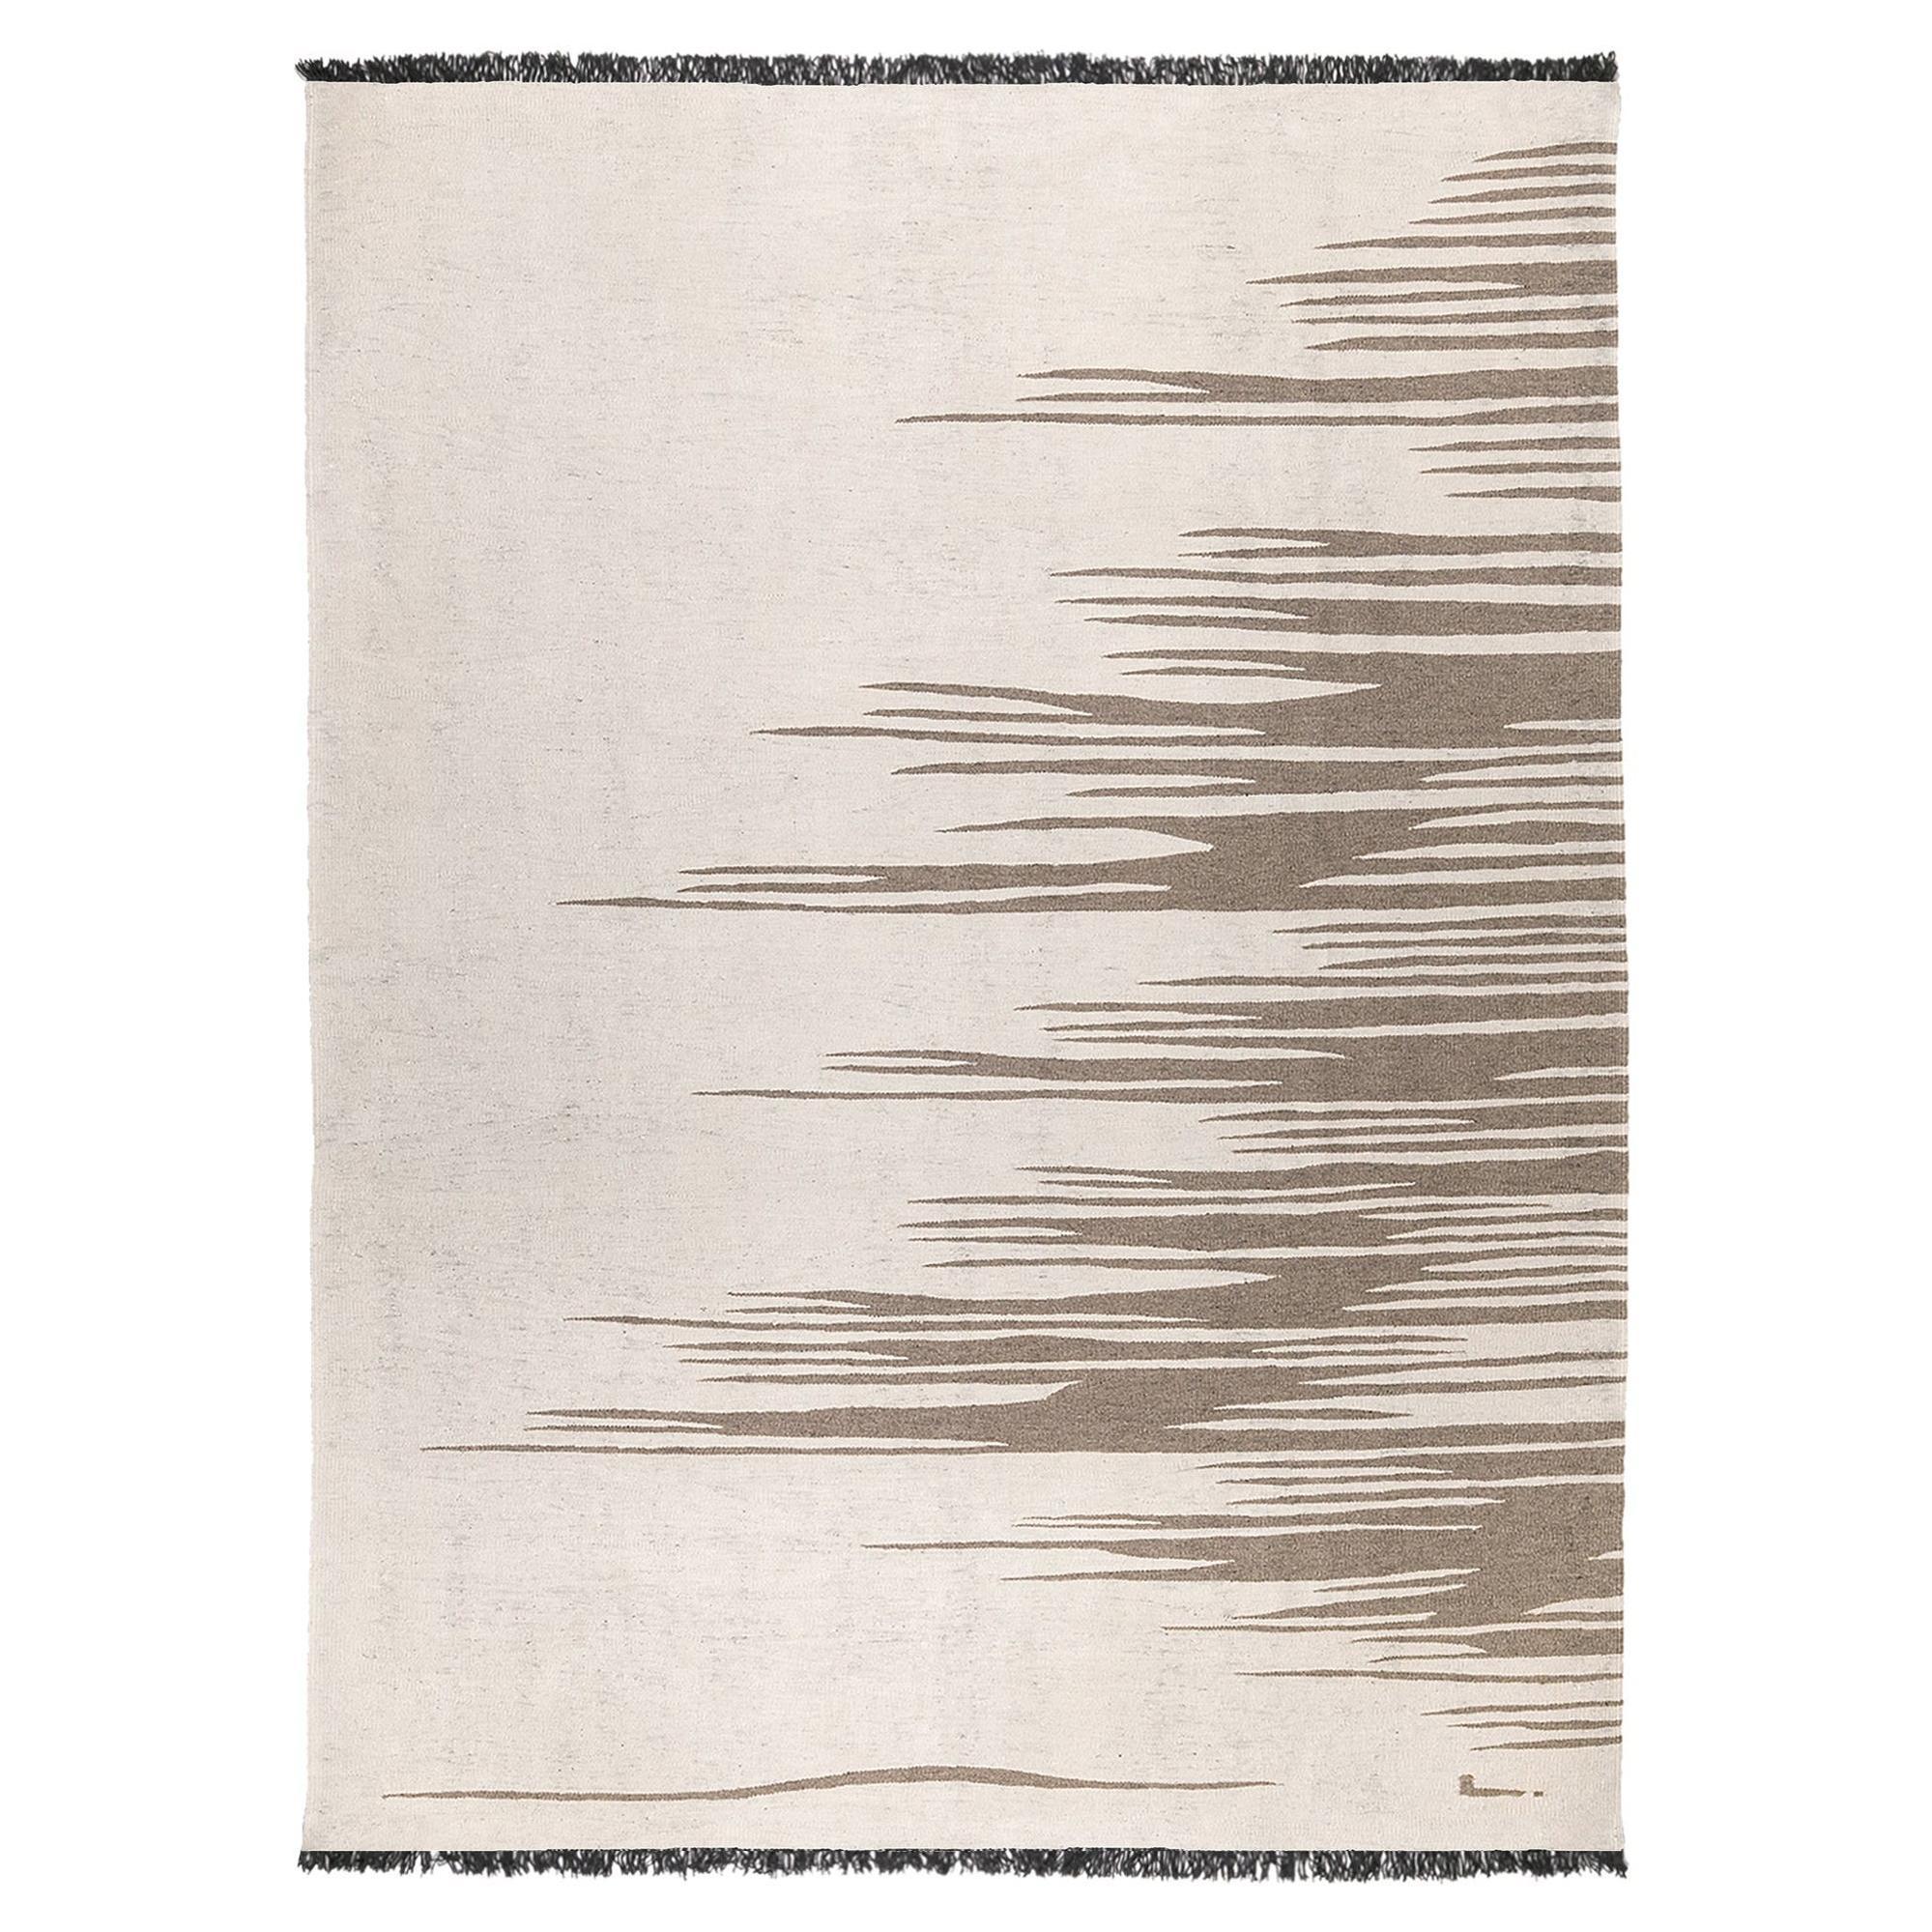 Ege No 3 Kilim Rug Wool Handwoven Dune White - Earthy Gray Made to Order